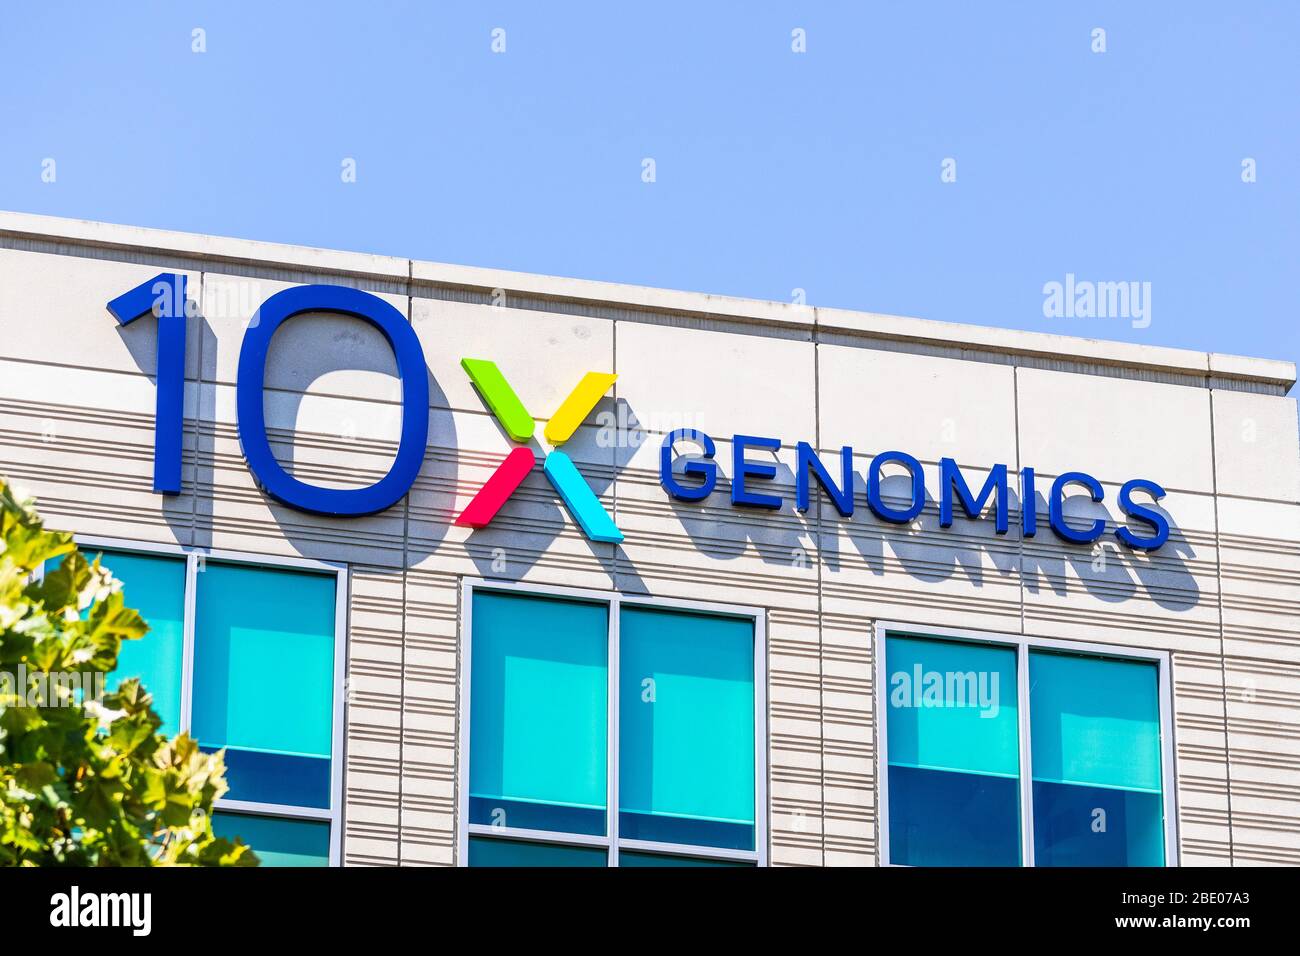 August 25, 2019 Pleasanton / CA / USA - 10x Genomics headquarters in Silicon Valley; 10x Genomics is an American biotechnology company that designs an Stock Photo